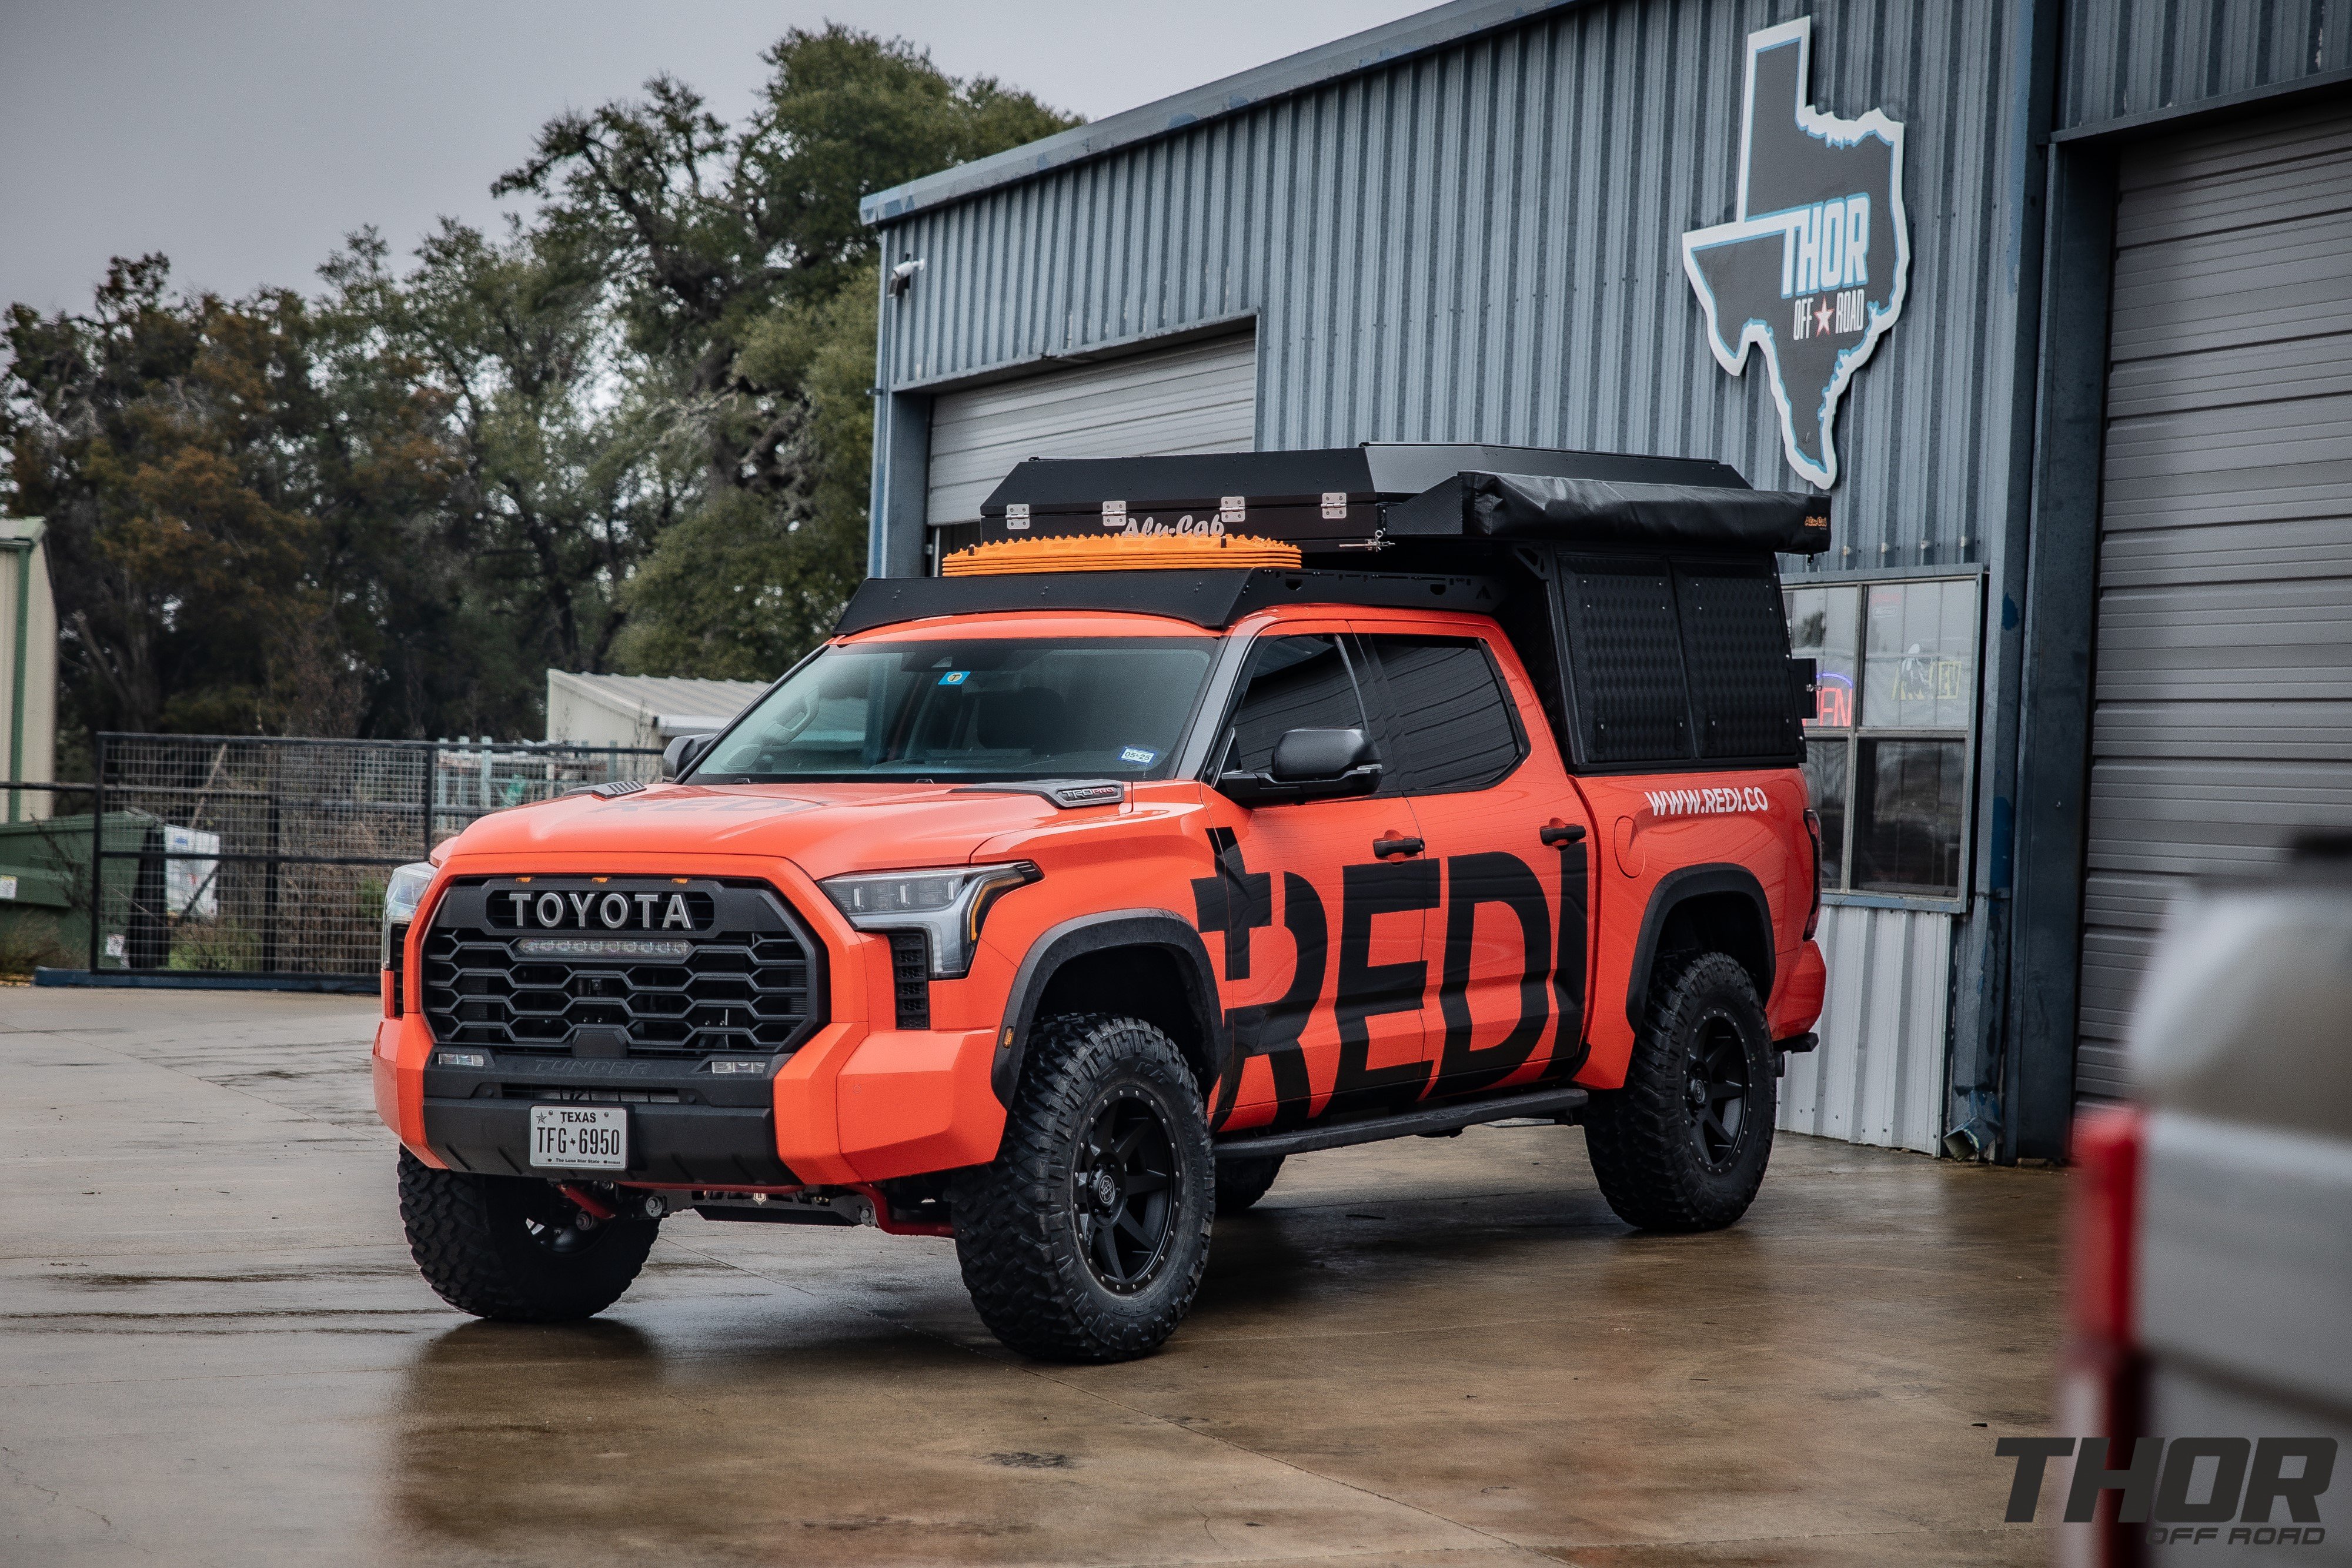 2023 Toyota Tundra TRD Pro in Solar Octane with Icon 6" Stage 5 Suspension Kit, Icon Recoil 20"x9" Wheels, Nitto Trail Grappler 37x12.50R20 Tires